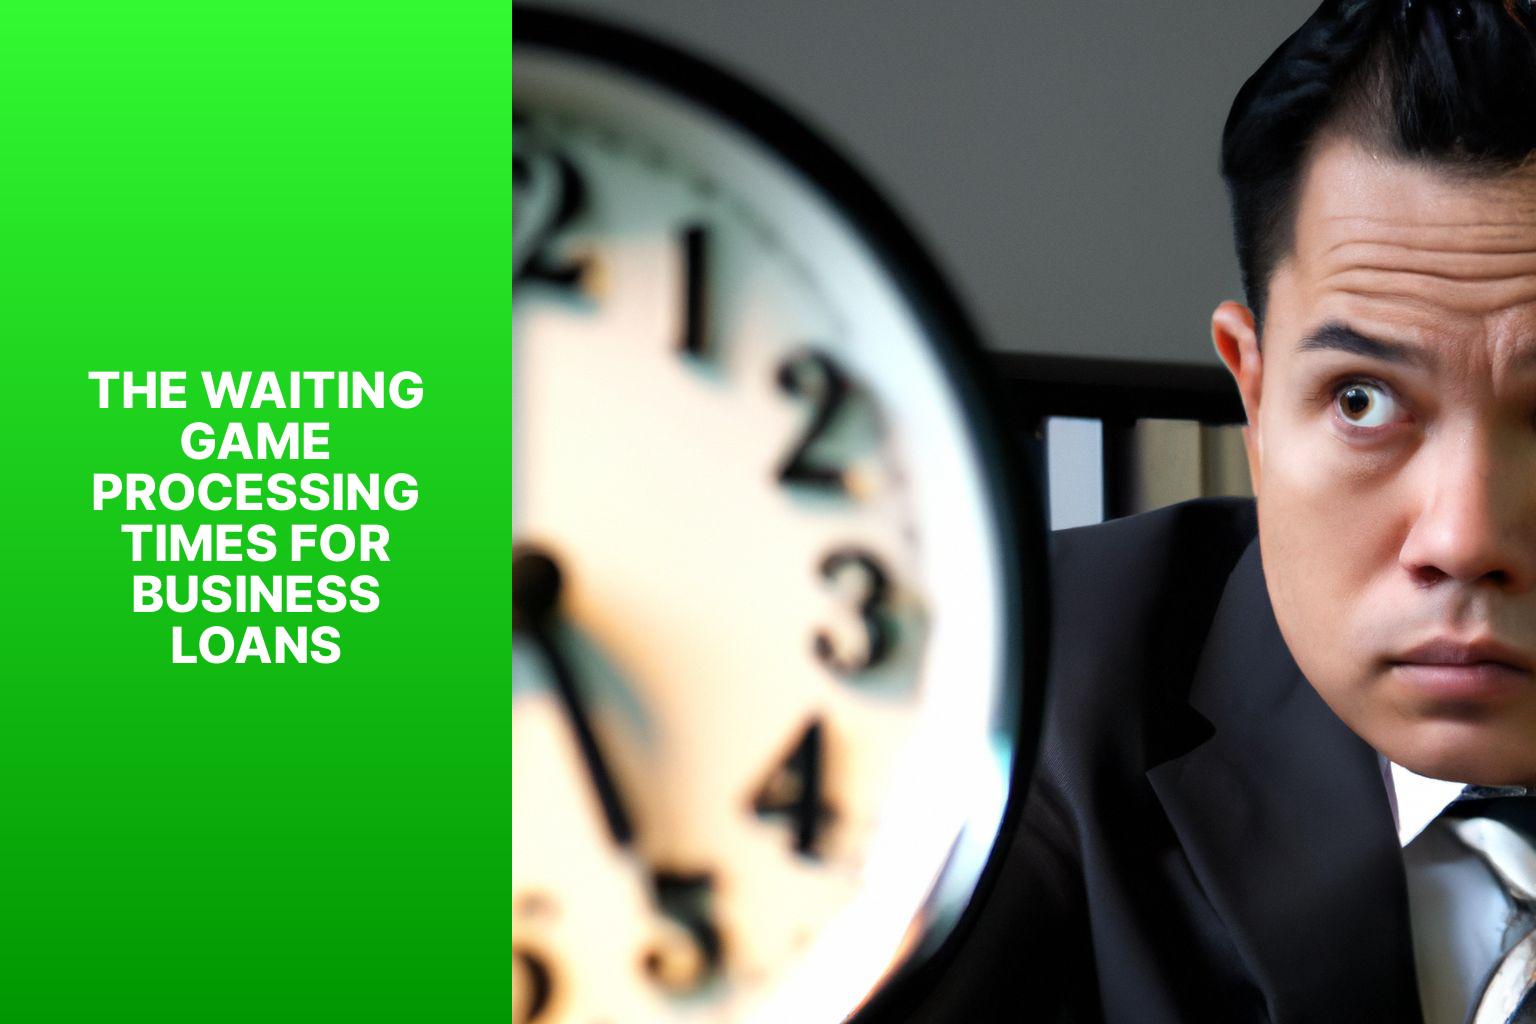 The Waiting Game Processing Times for Business Loans